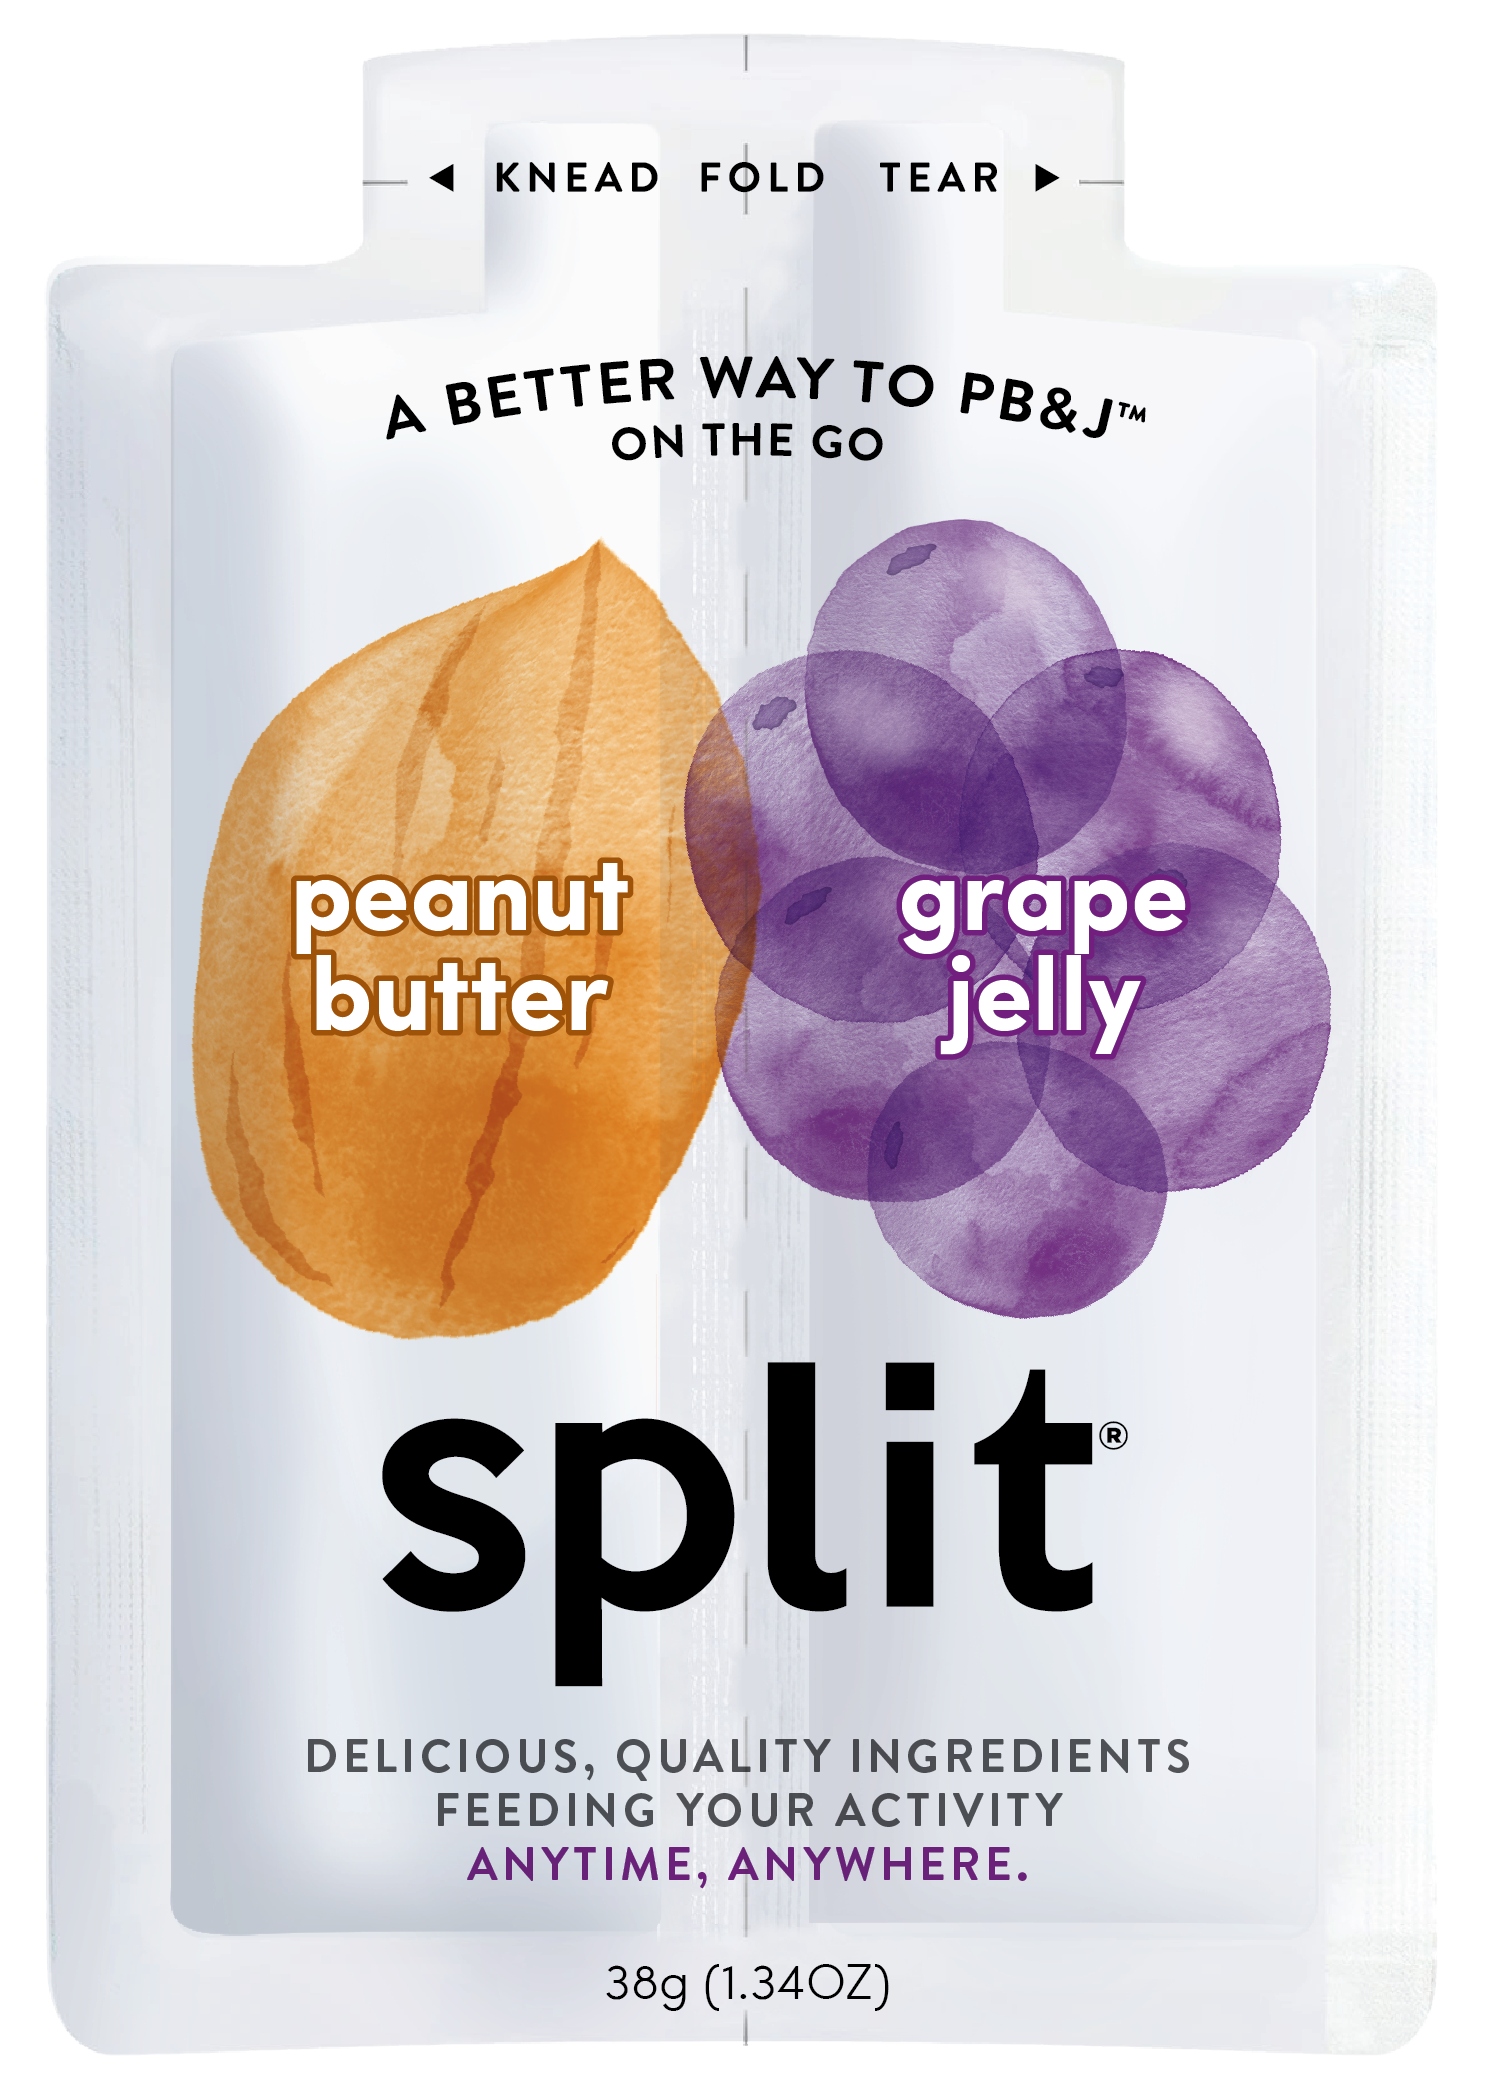 Split Nutrition Peanut Butter and Grape Jelly (10ct box) 6 innerpacks per case 1.4 oz